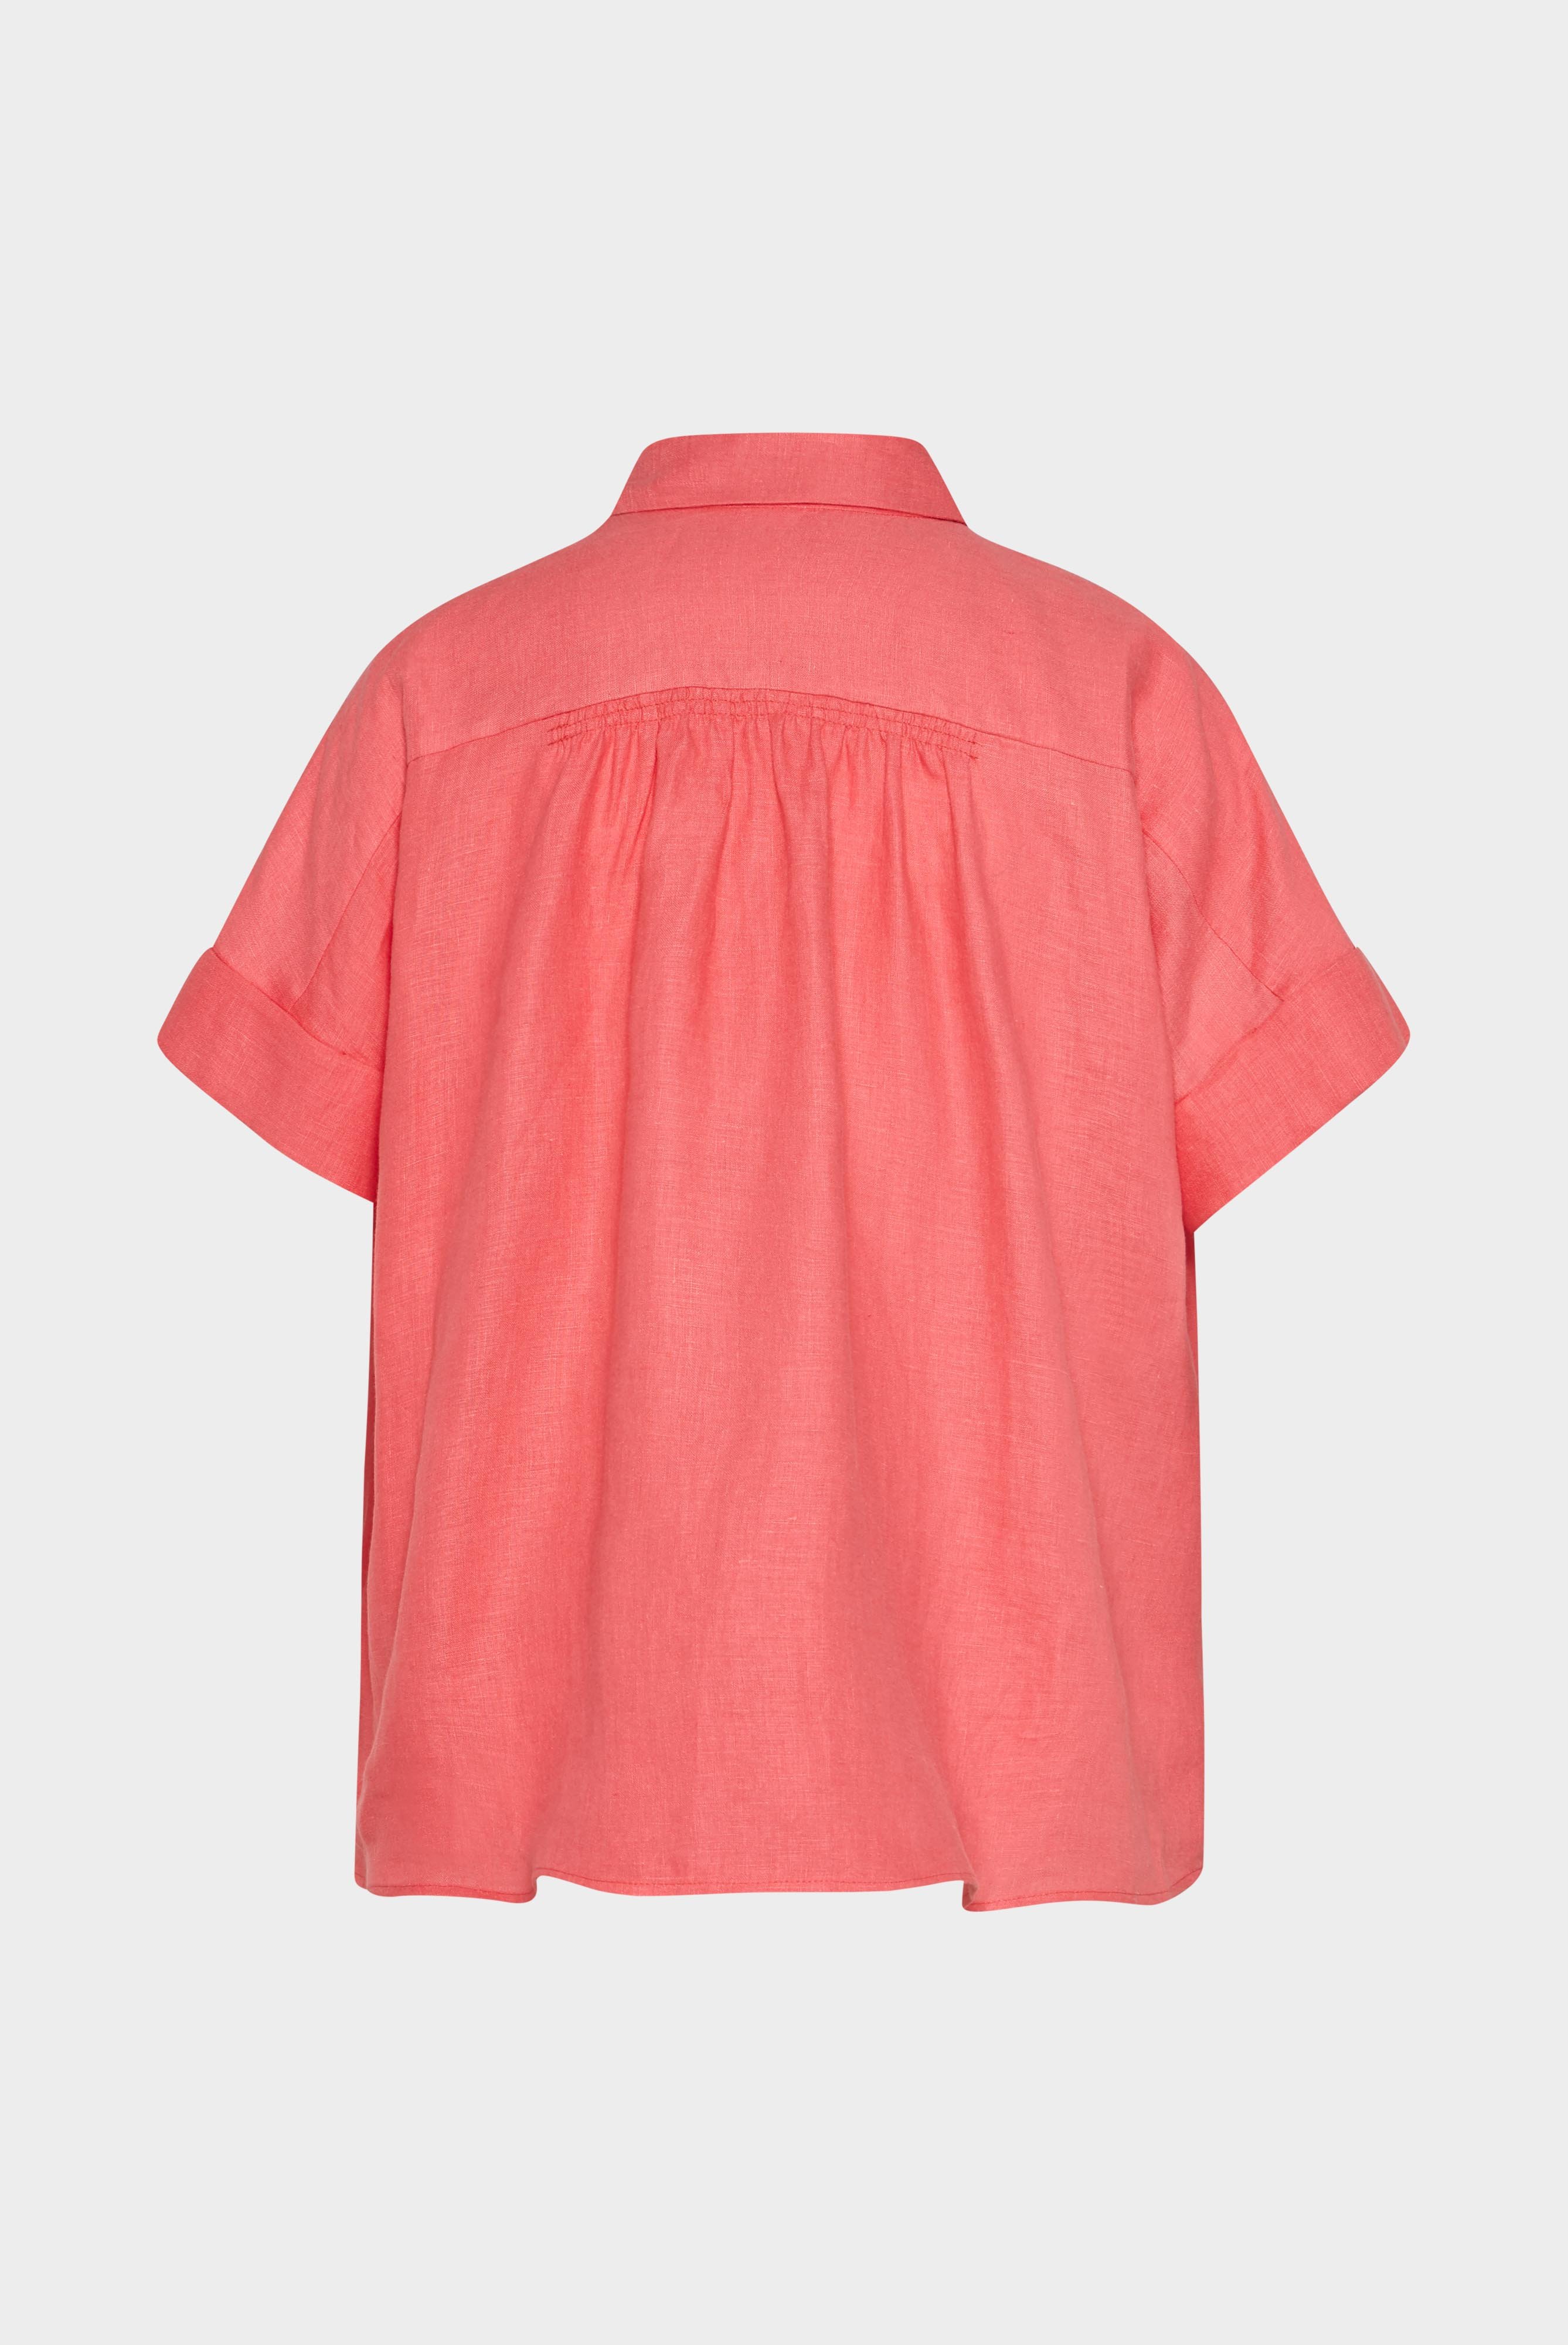 Casual Blouses+Short-Sleeved Blouse made of Upper Linen+05.525R.P8.150555.440.44